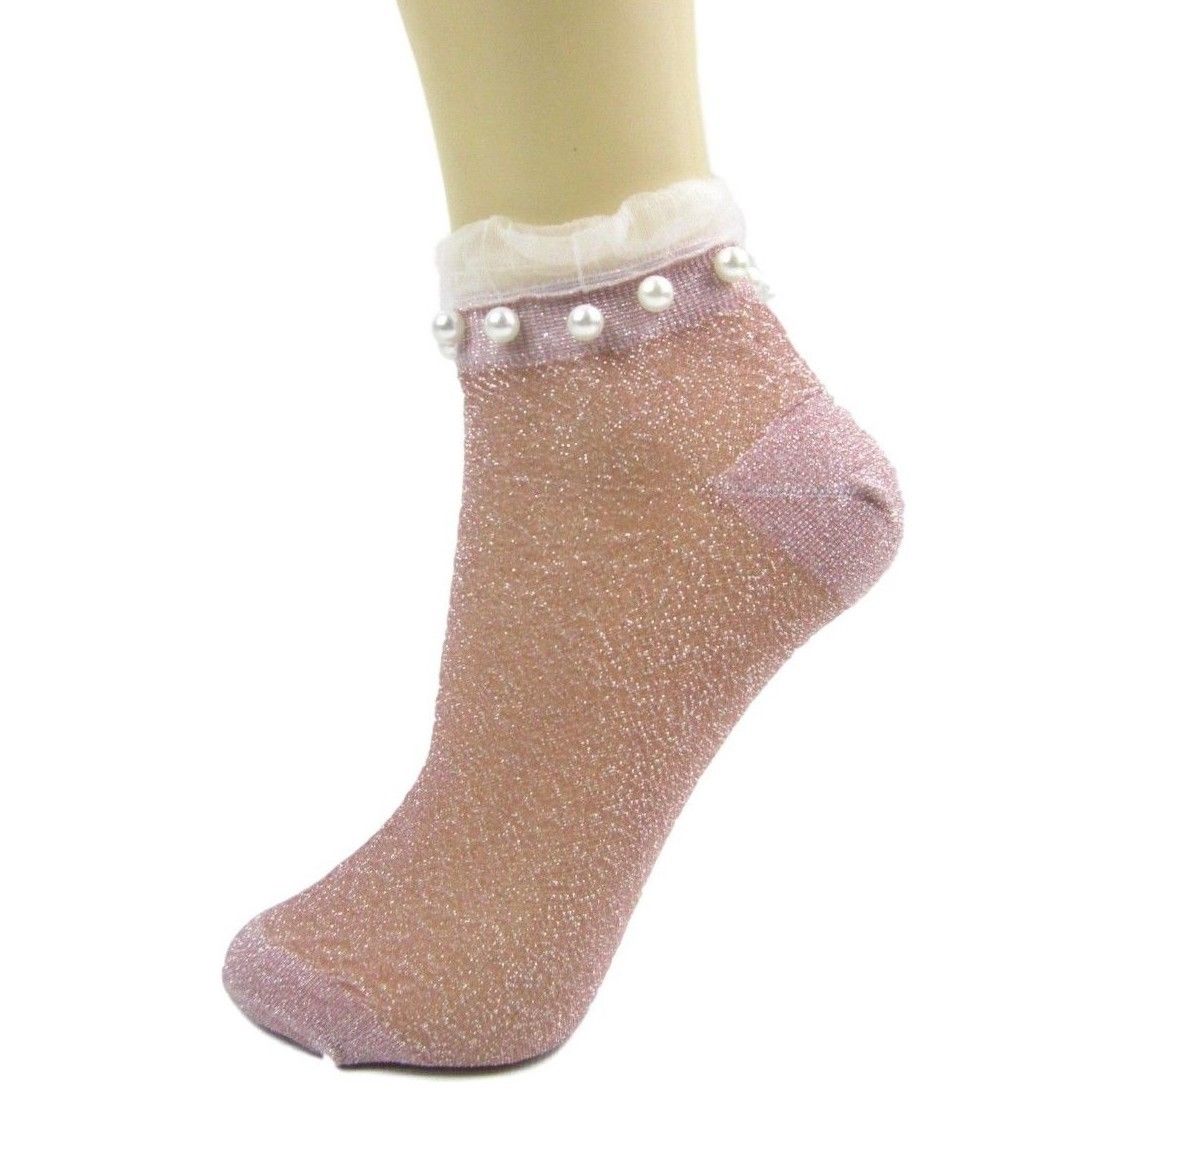 Glitter Ankle Socks With Pearl & Frill Cuff